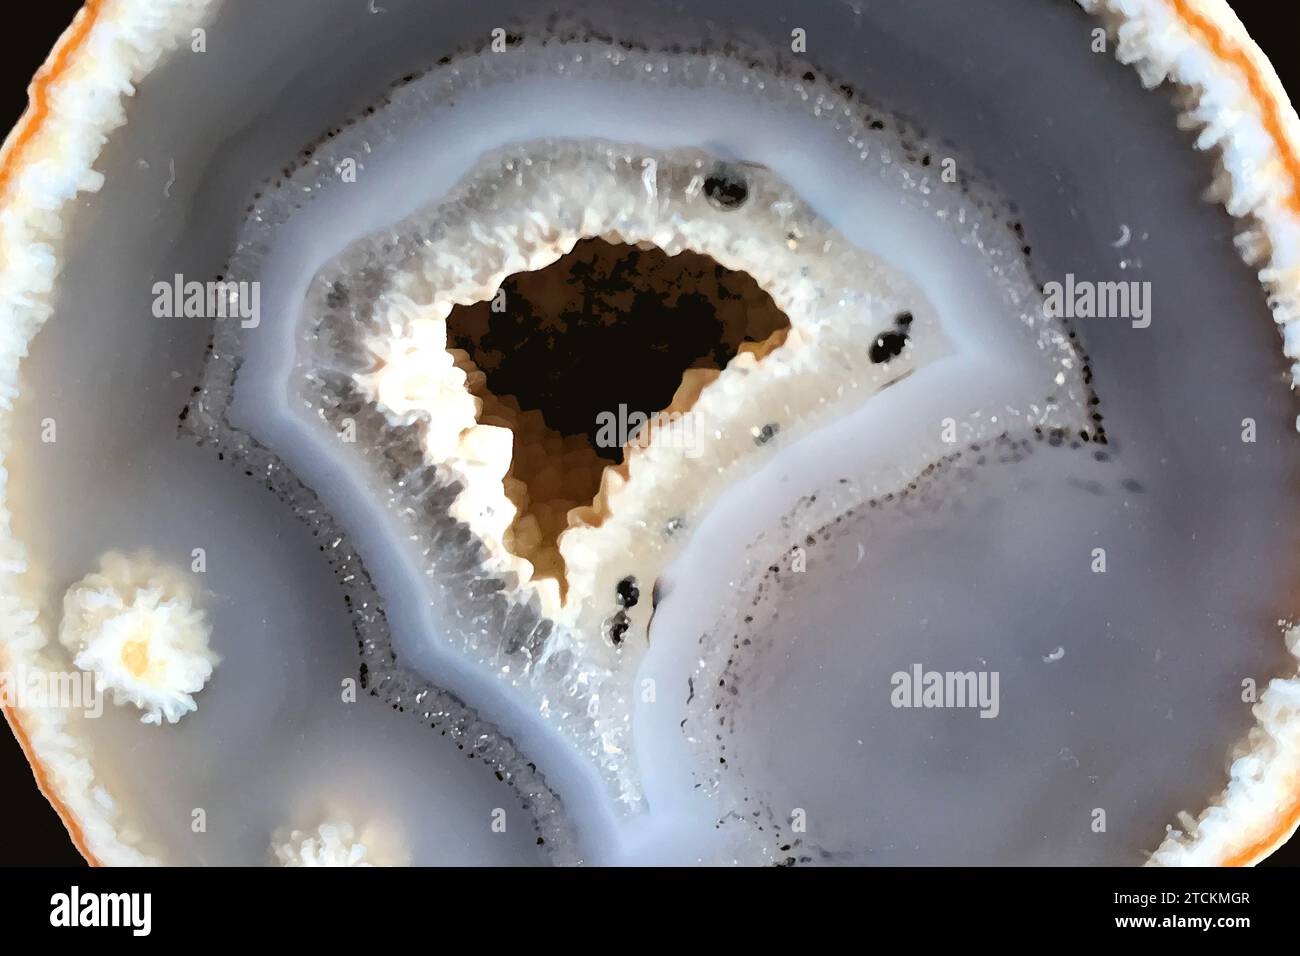 Art inspired by crystal filled interior of a geode, hollow, often spherical rocks, containing mineral matter (including quartz) are secluded. Geology Stock Photo